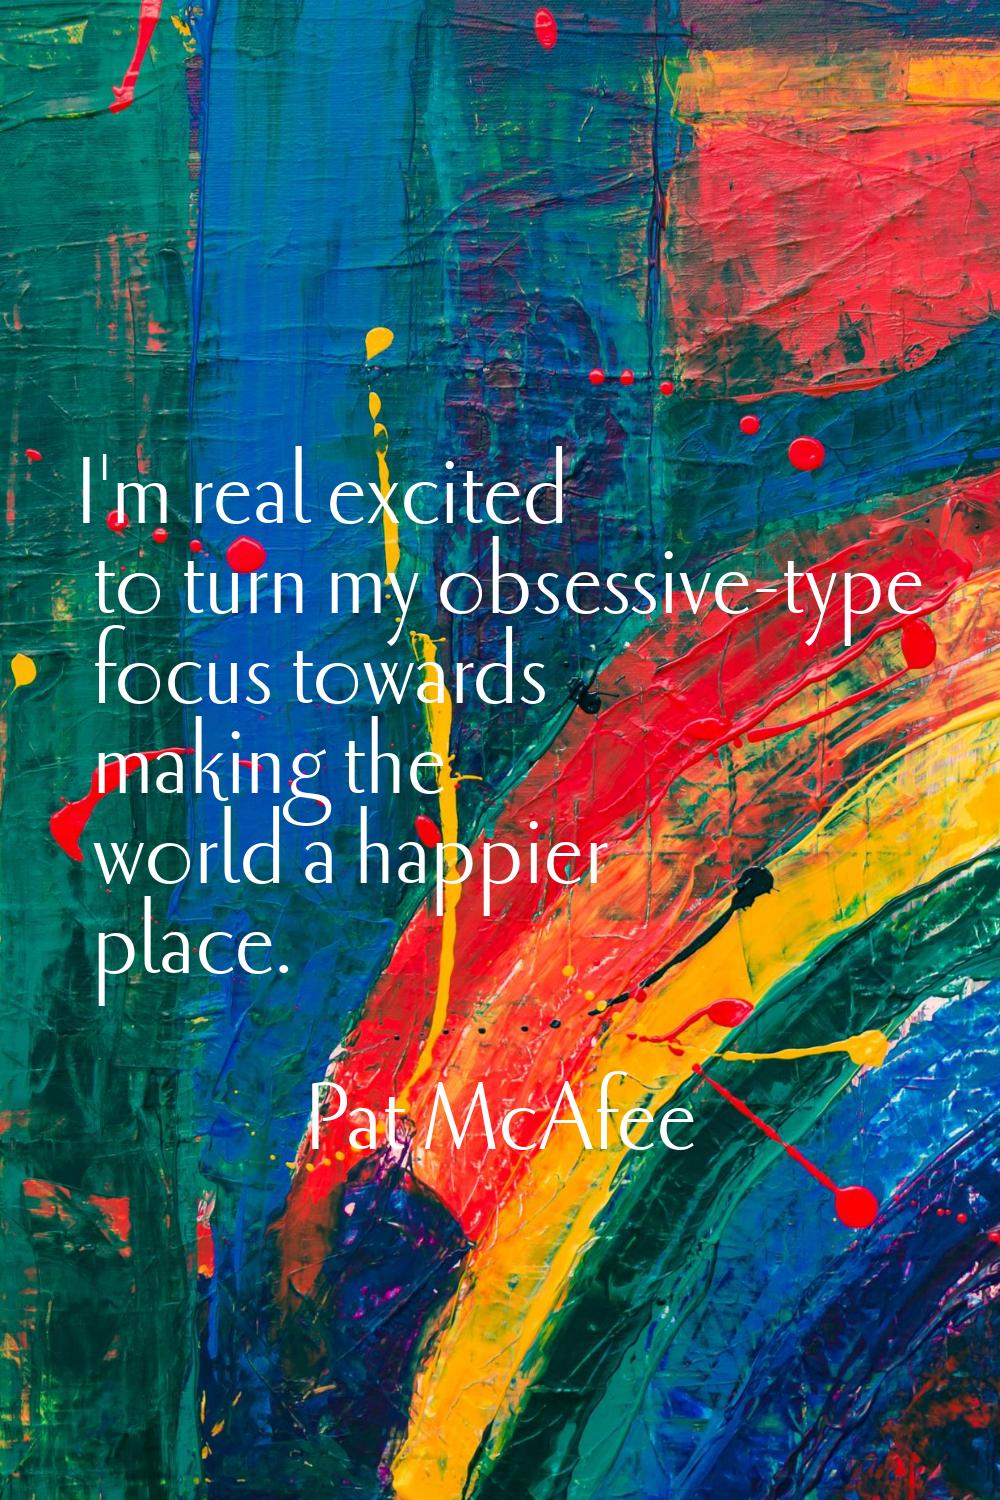 I'm real excited to turn my obsessive-type focus towards making the world a happier place.